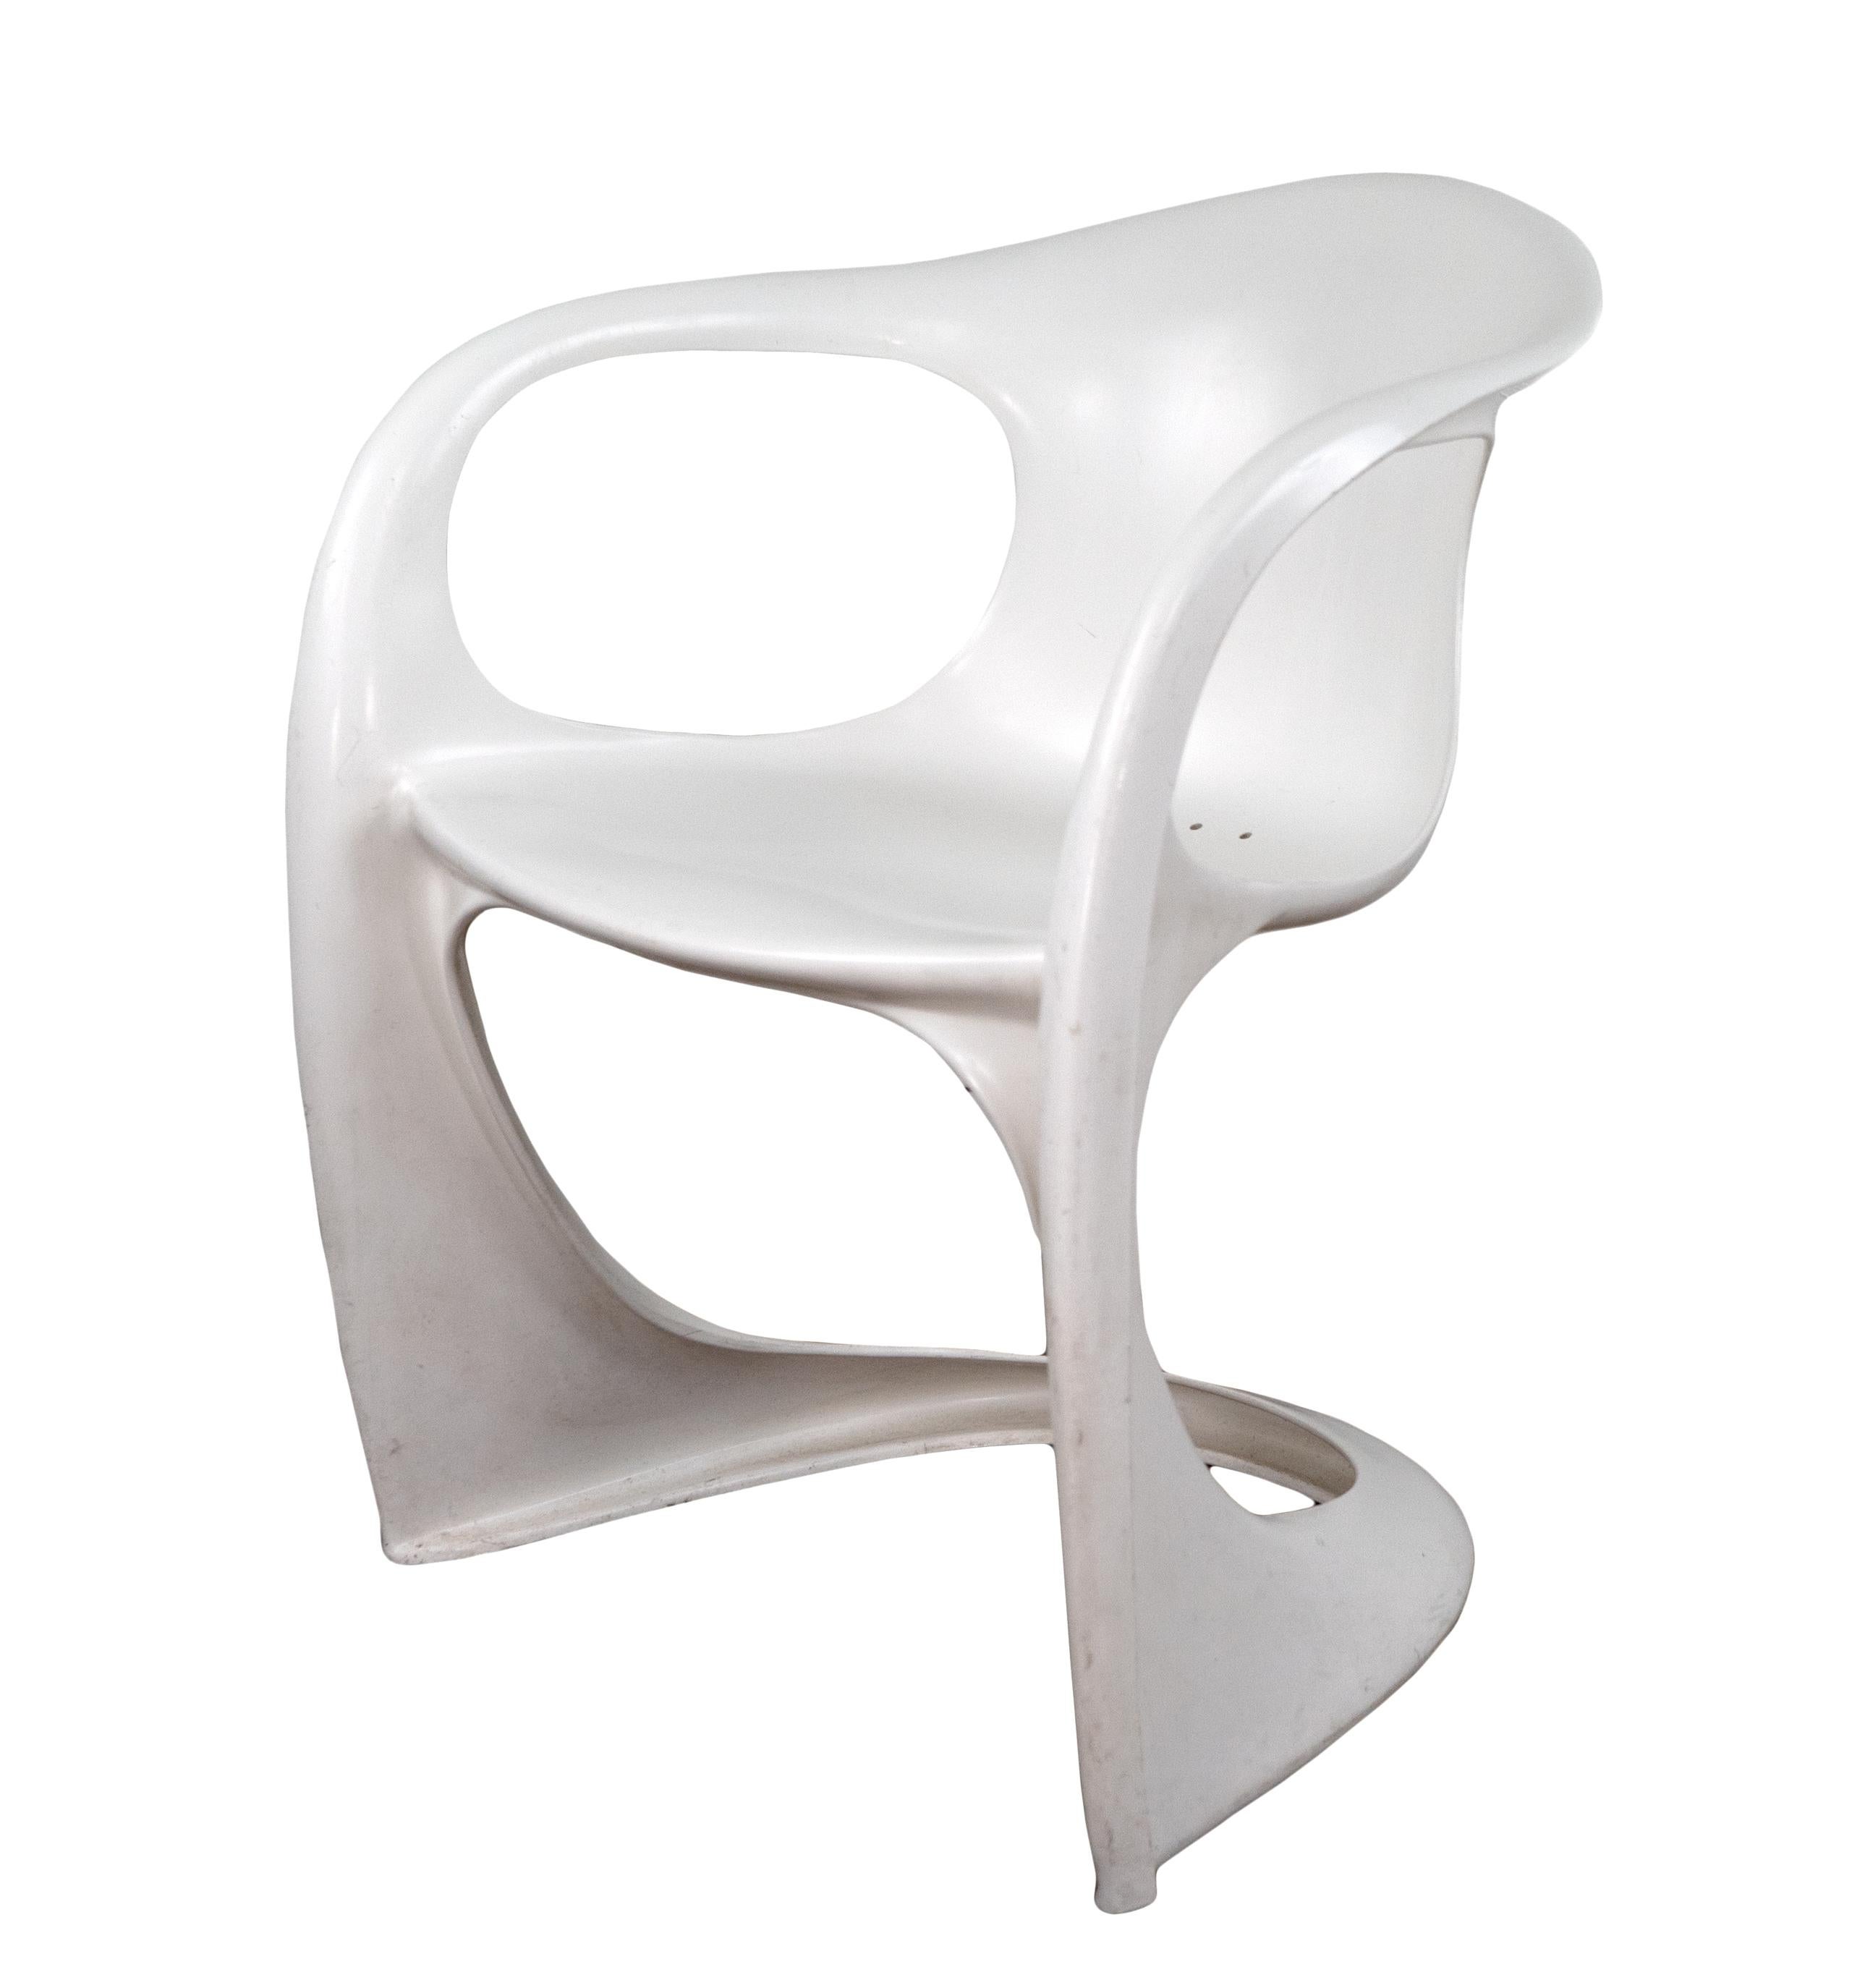 A molded sculptural soft white colored Casalino chair made of automobile strength plastic. A great 1970s design from the POP art period by Alexander Begge and sometimes referred to as the Begge chair.